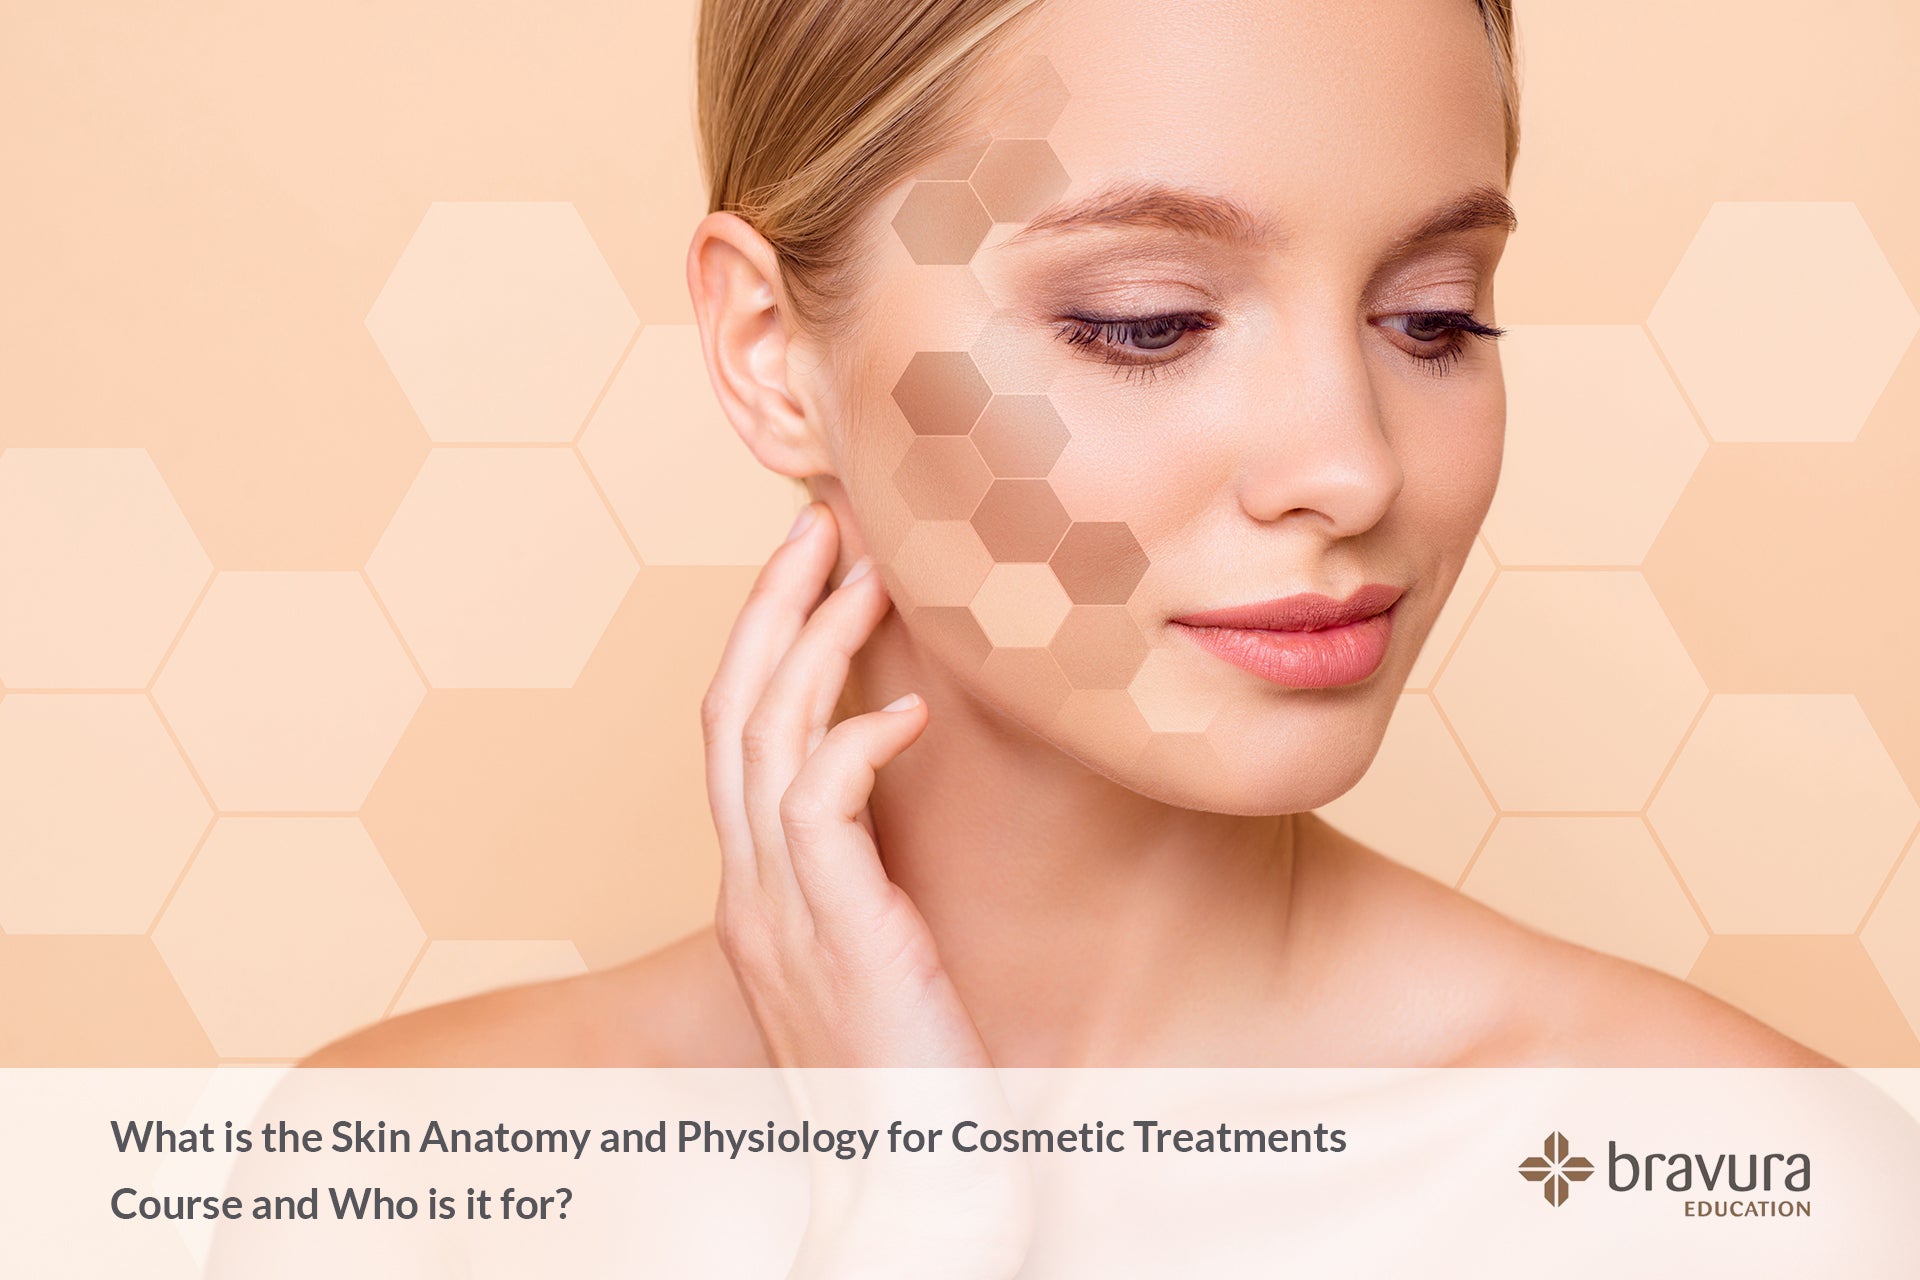 Skin Anatomy and Physiology for Cosmetic Treatments